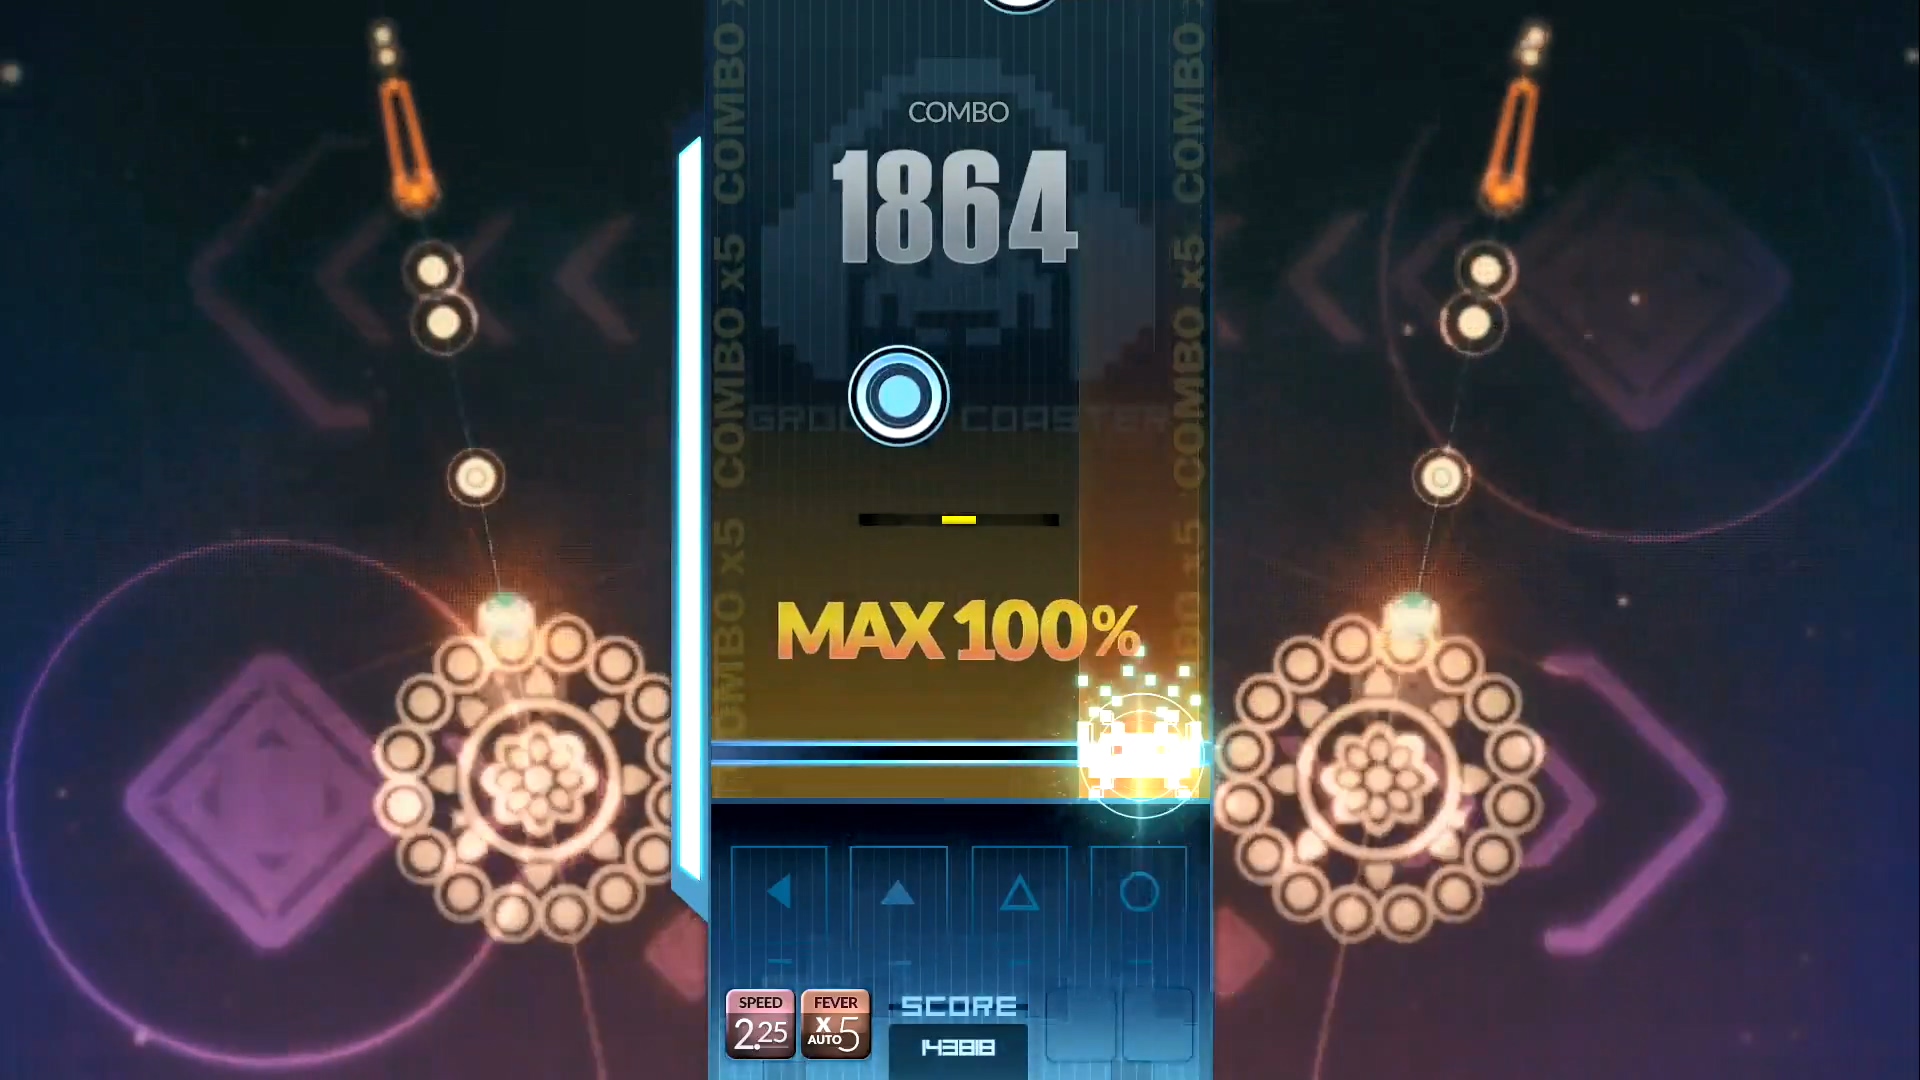 Djmax Respect Groove Coasterパック 配信開始のお知らせ Arc System Works Official Web Site